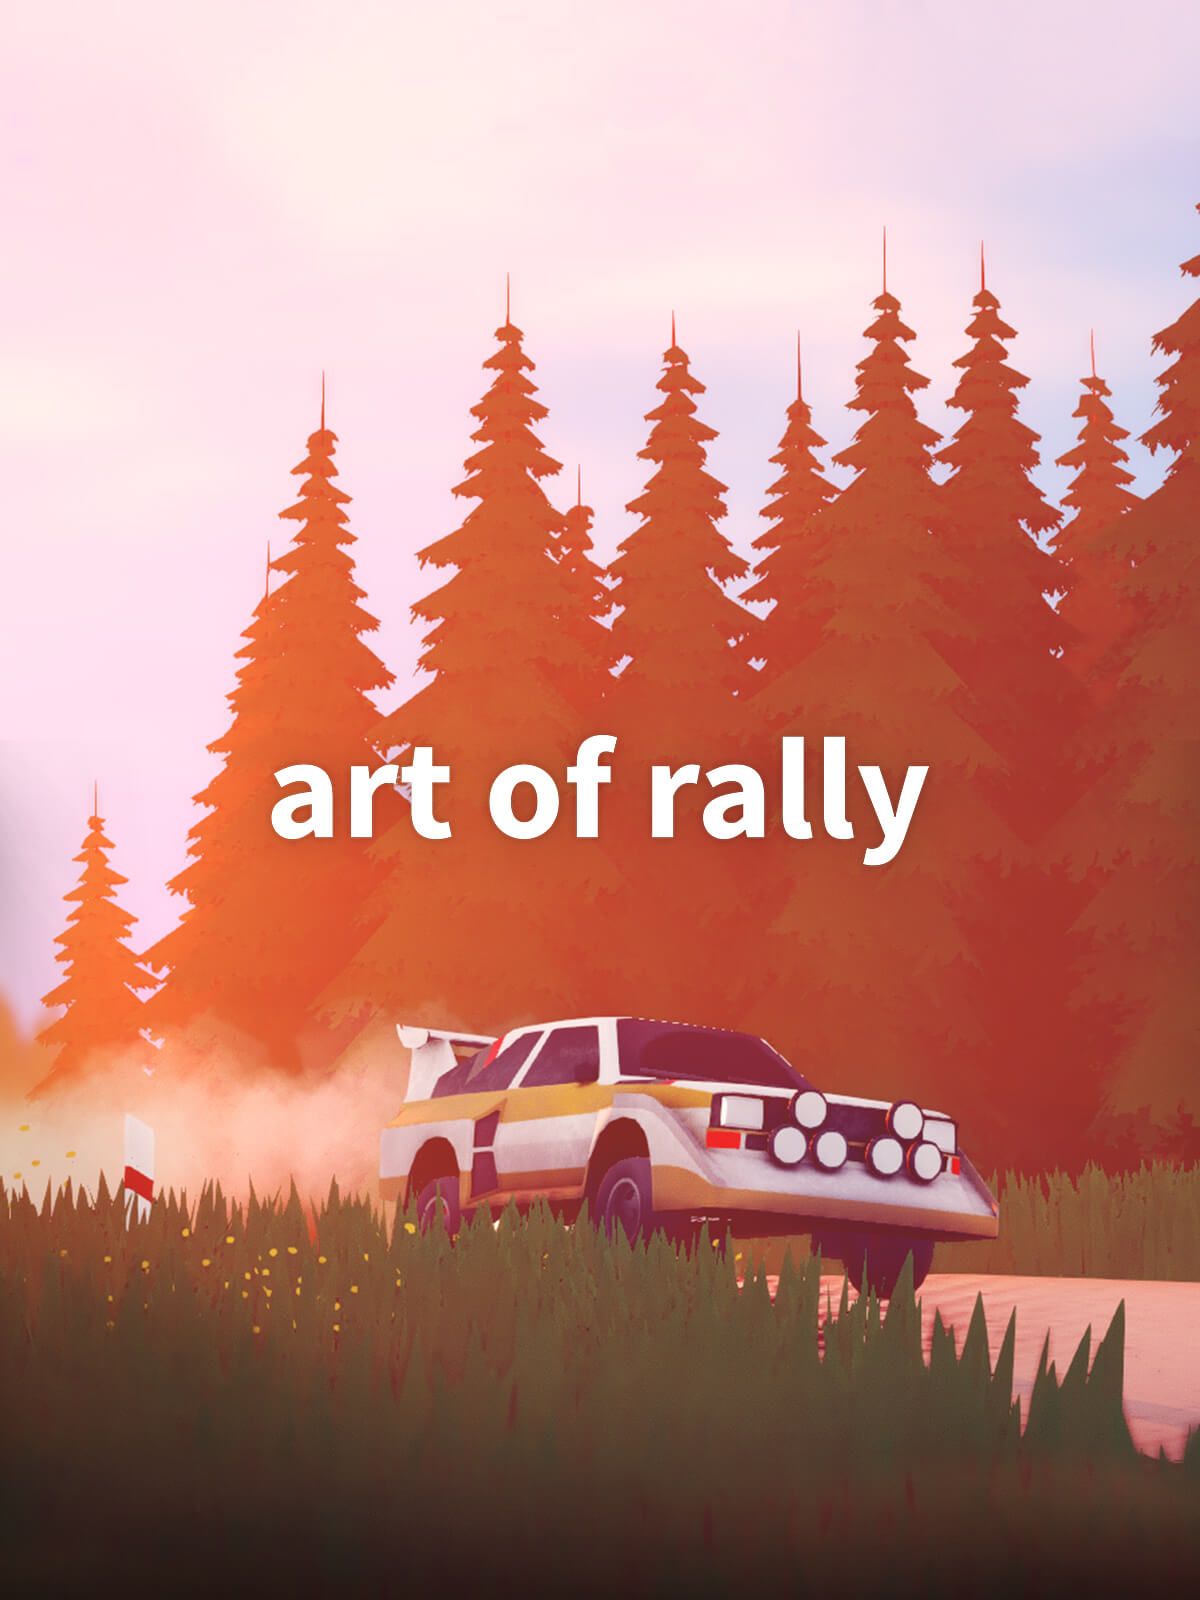 Art of Rally do something dangerous with style is art